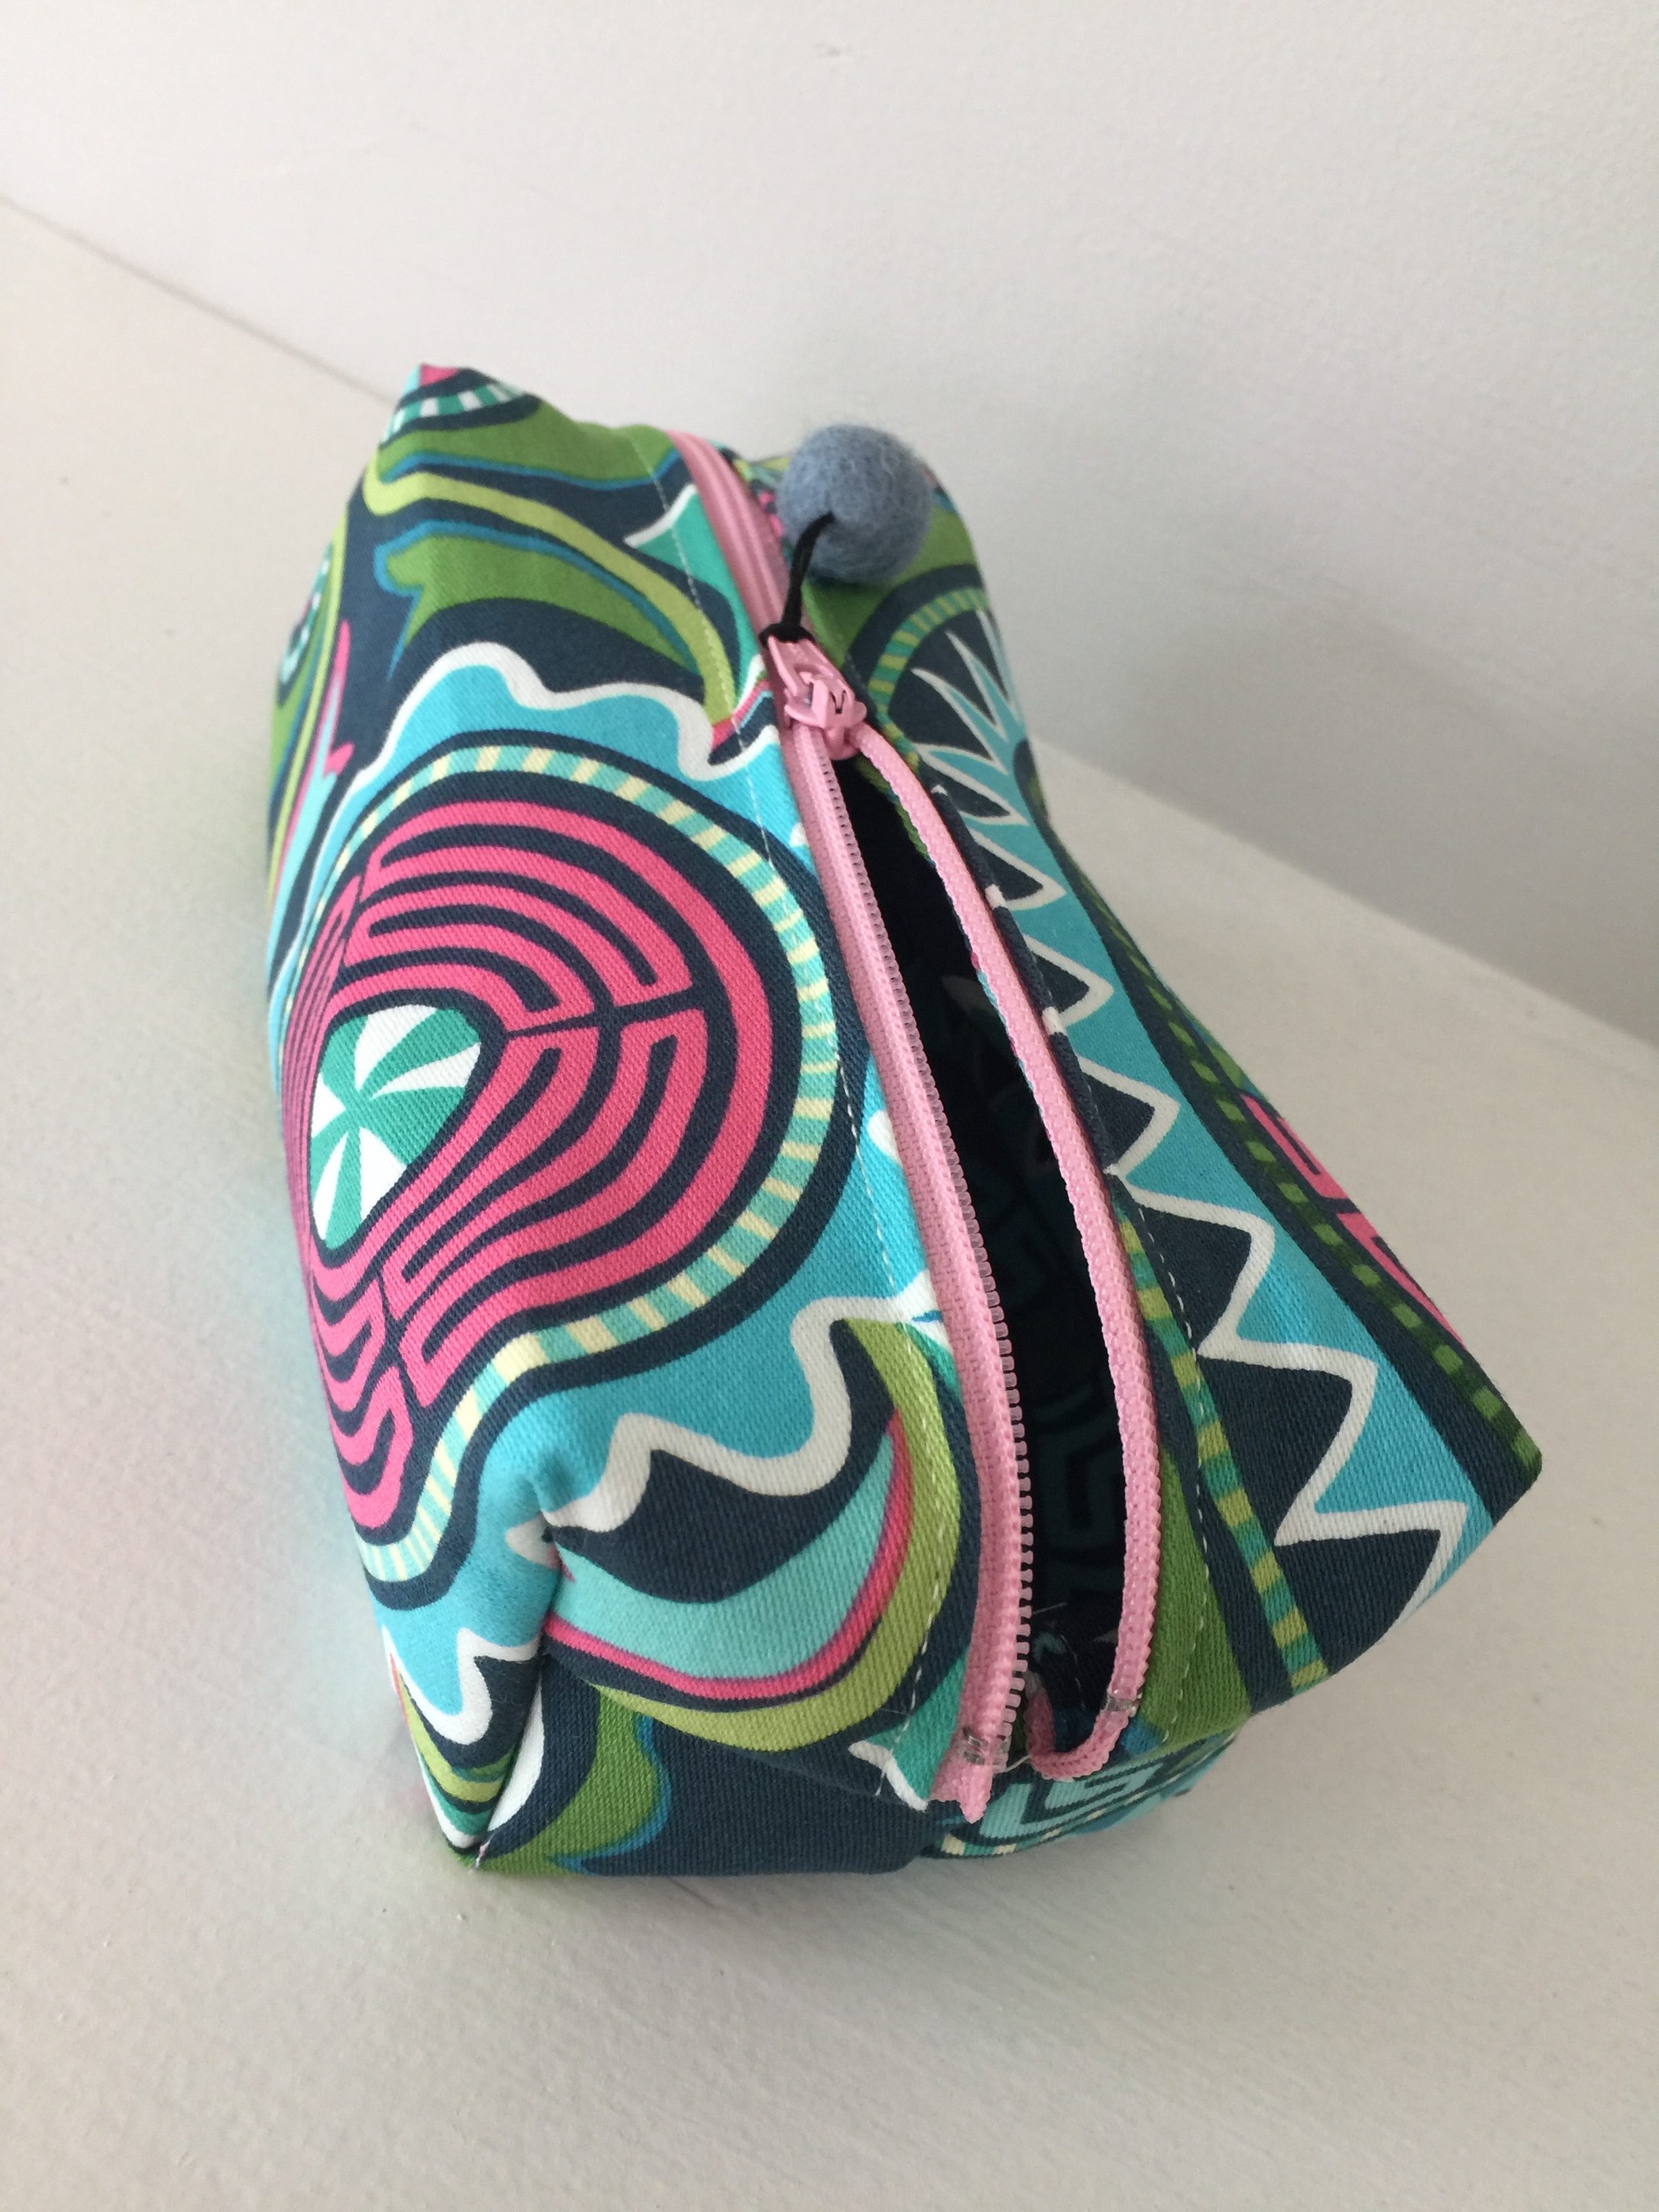 How to sew a boxy zippered cosmetic bag – Sewspire